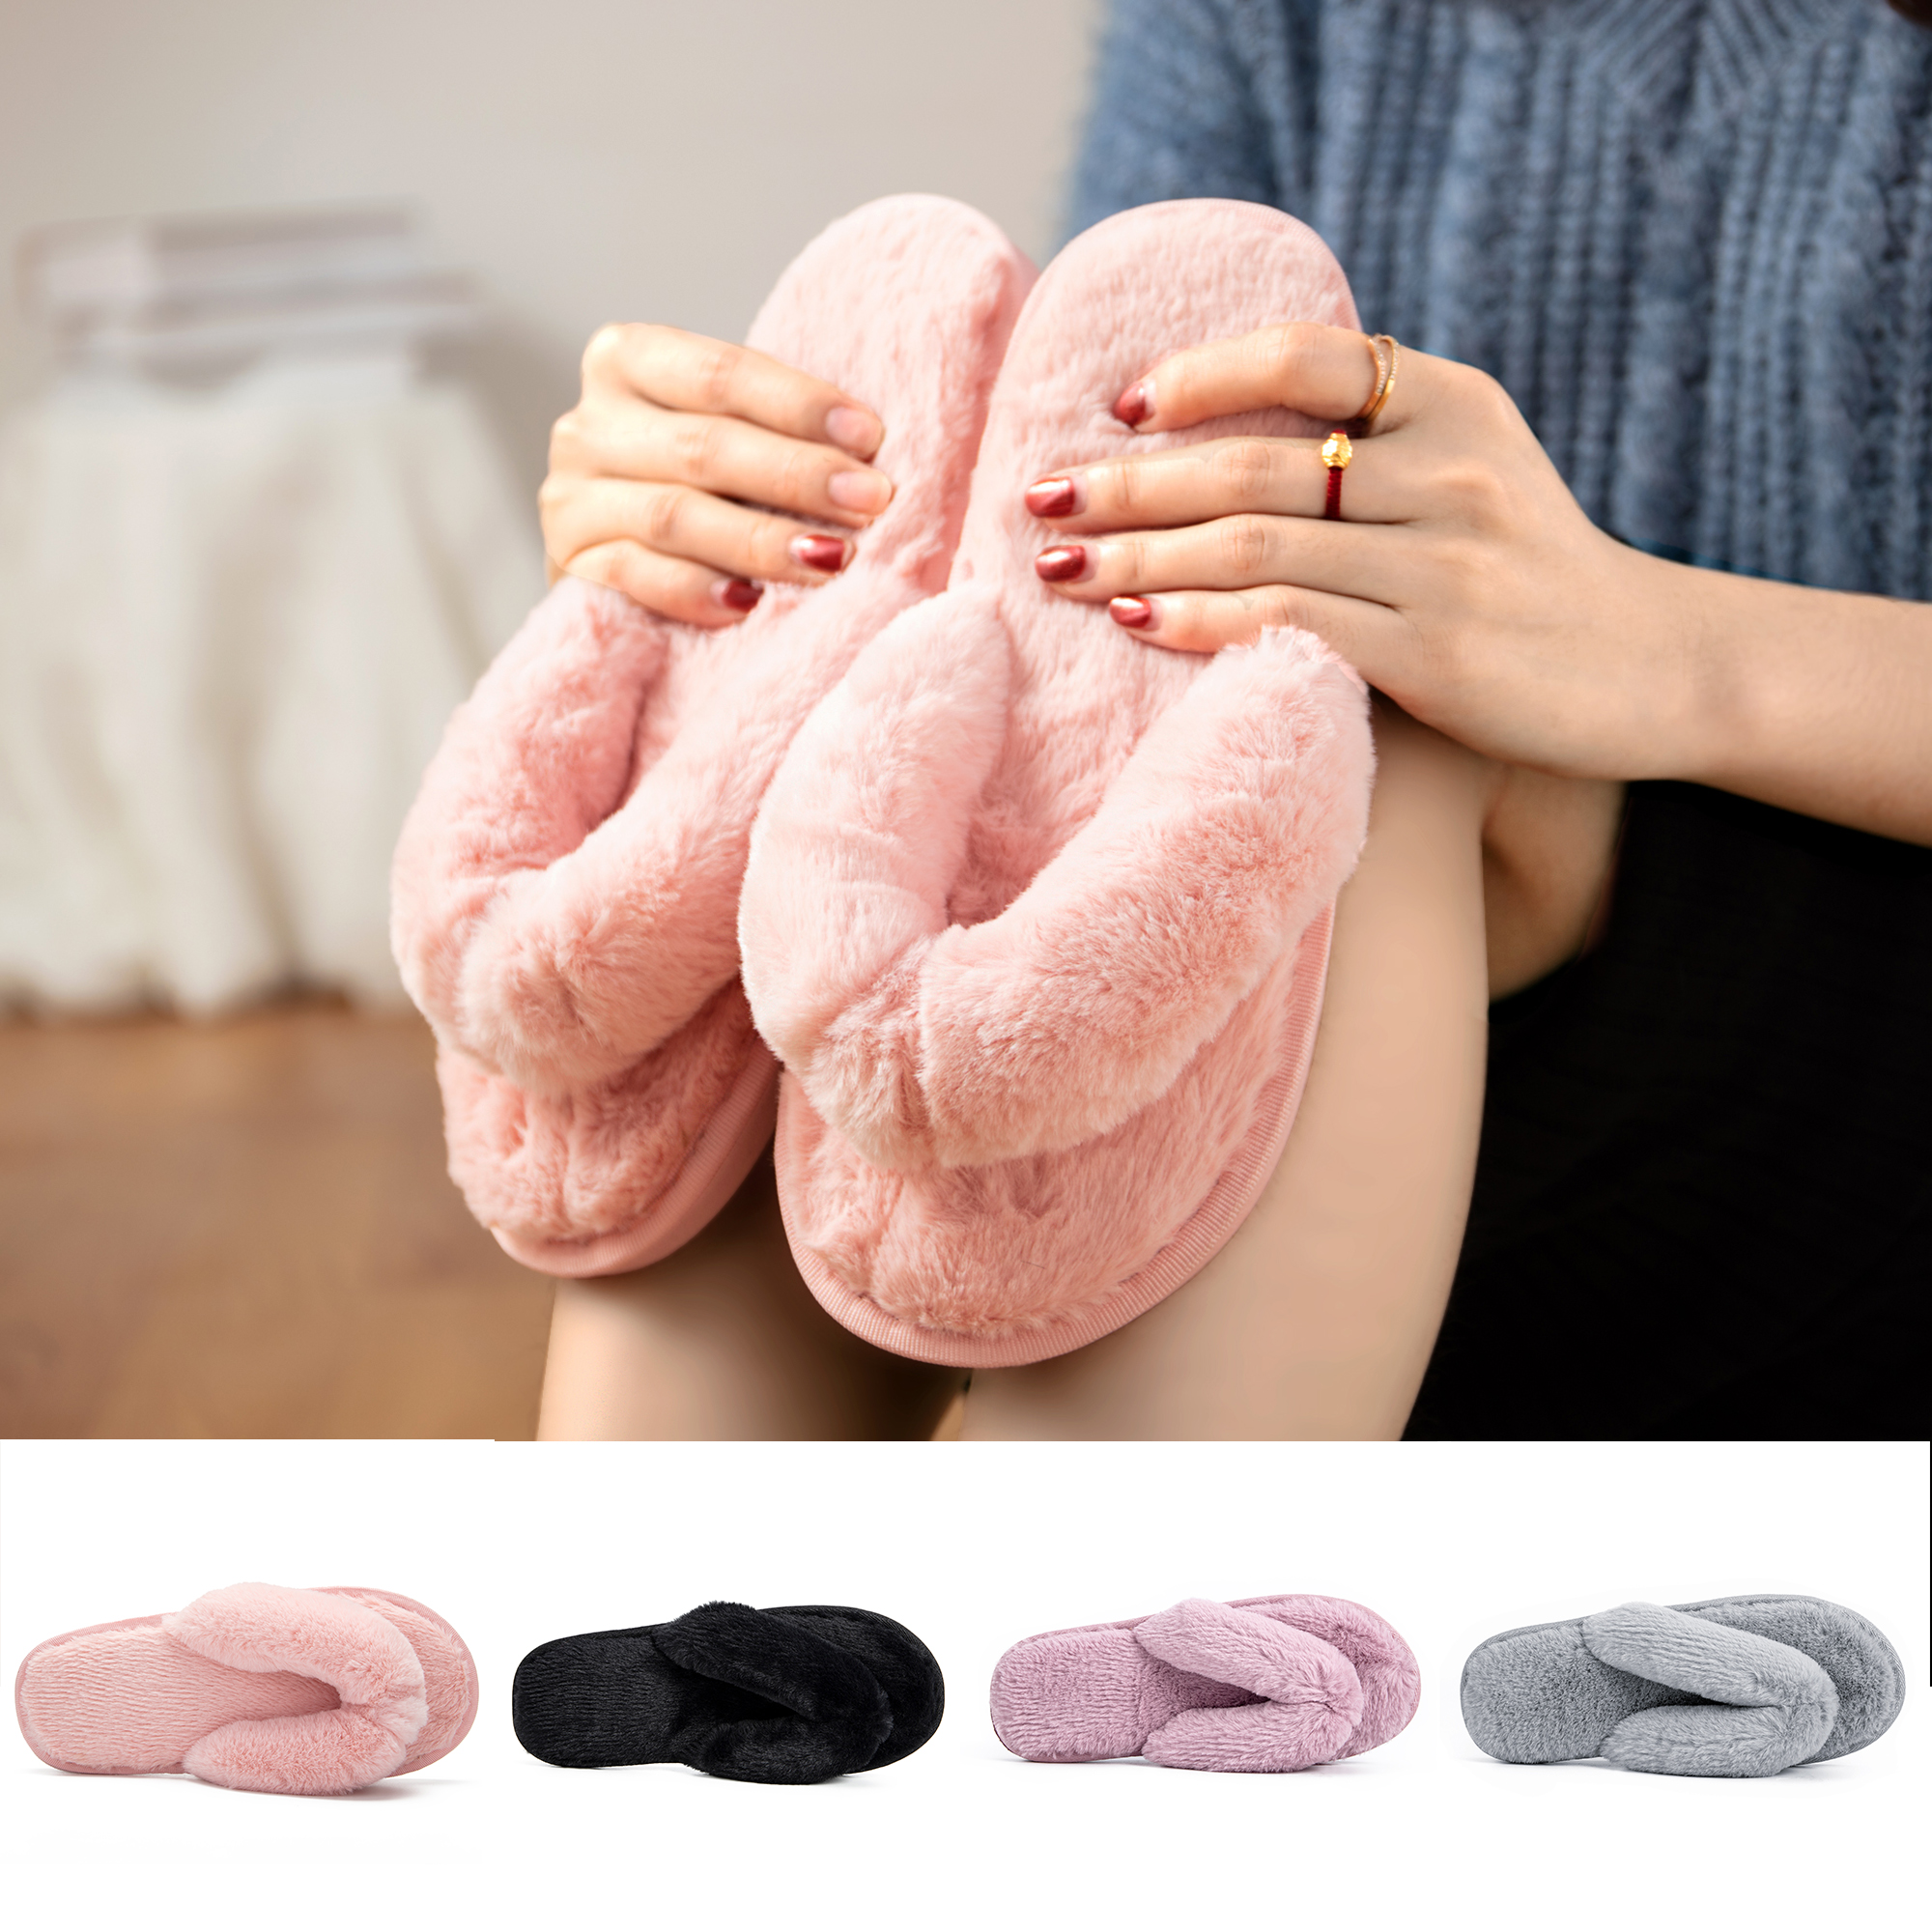 Women's Fuzzy Crossband Fluffy Furry Fur Slippers Flip Flop Winter Warm Cozy House Sandals Slides Soft Flat Comfy - image 1 of 9